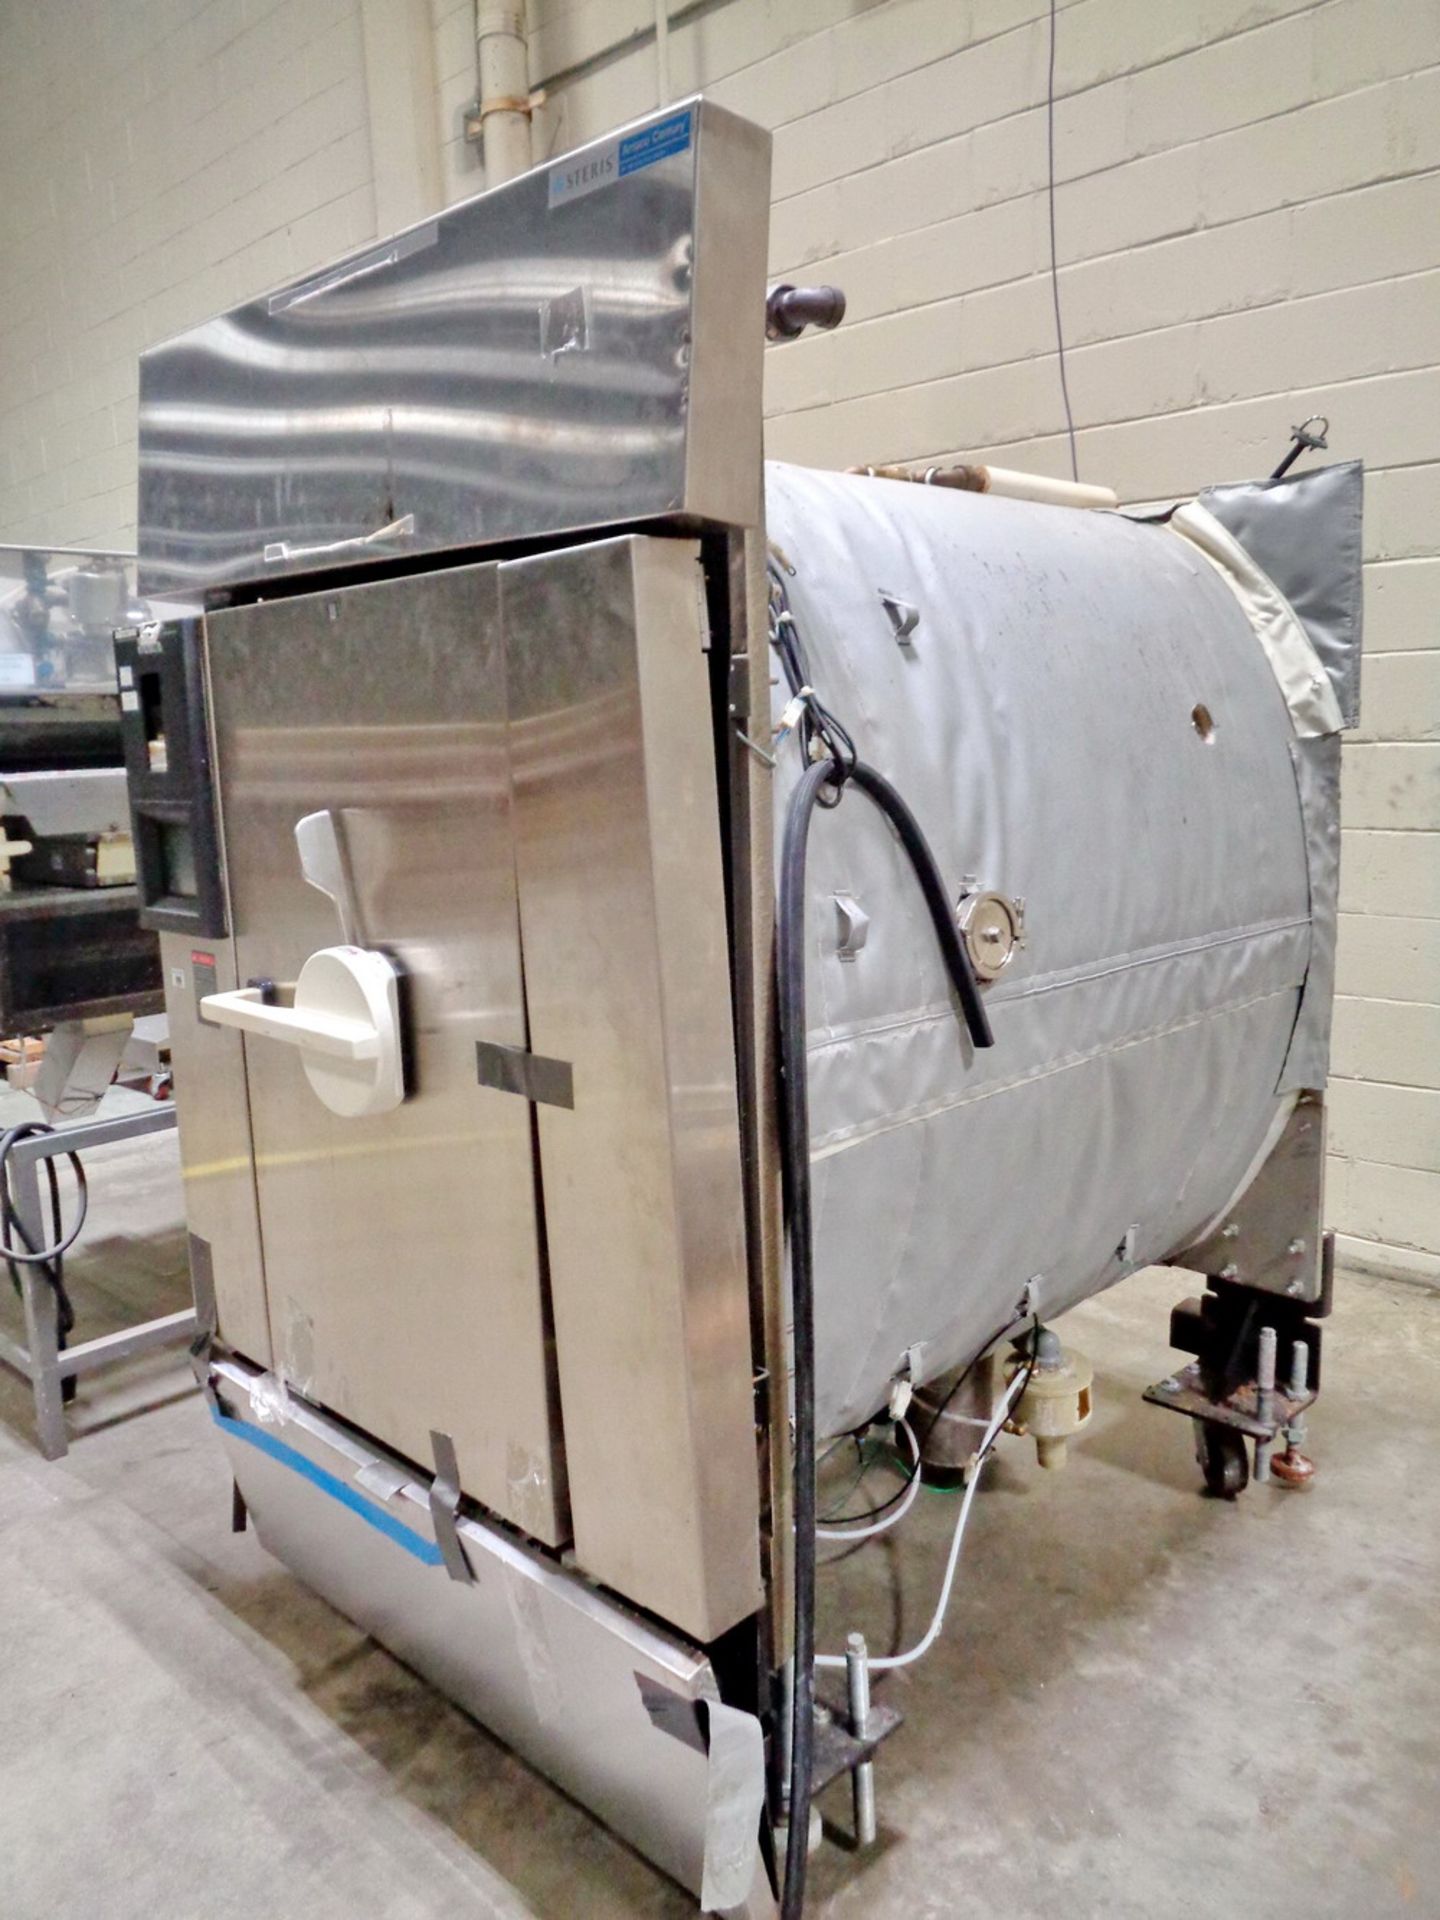 Steris Autoclave, single door, jacketed chamber, new 2006, S/N 0806024 - Image 2 of 6